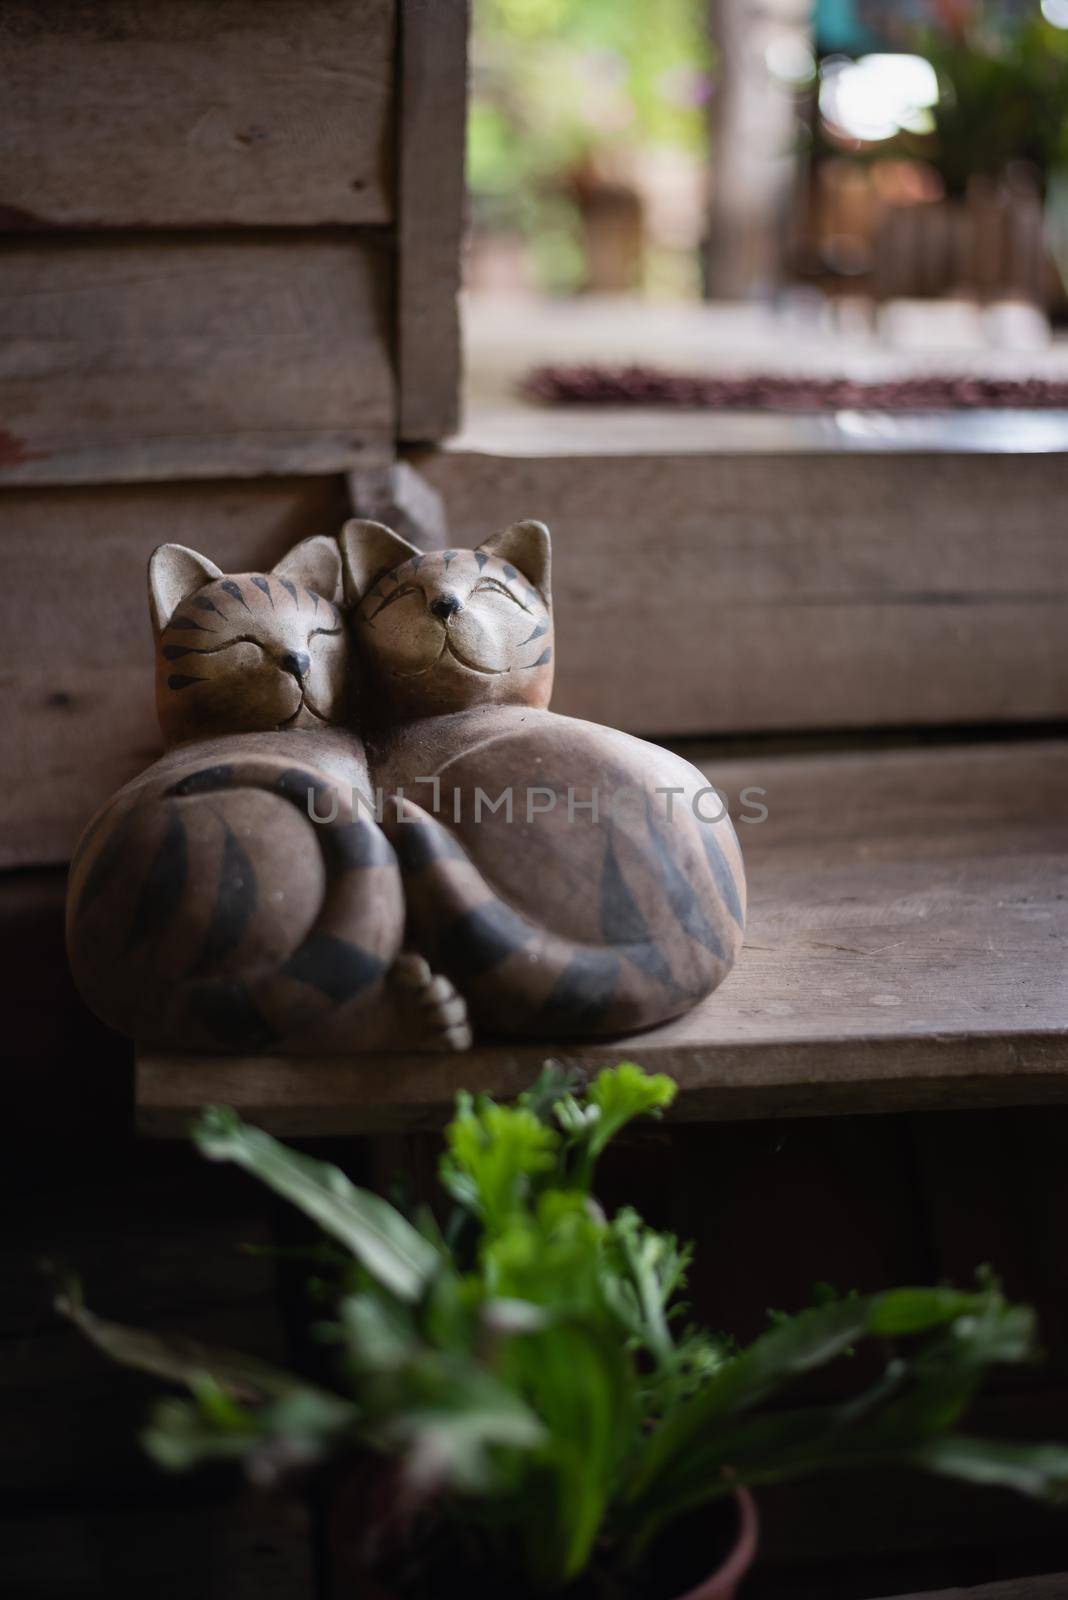 close up of cats doll on wood floor